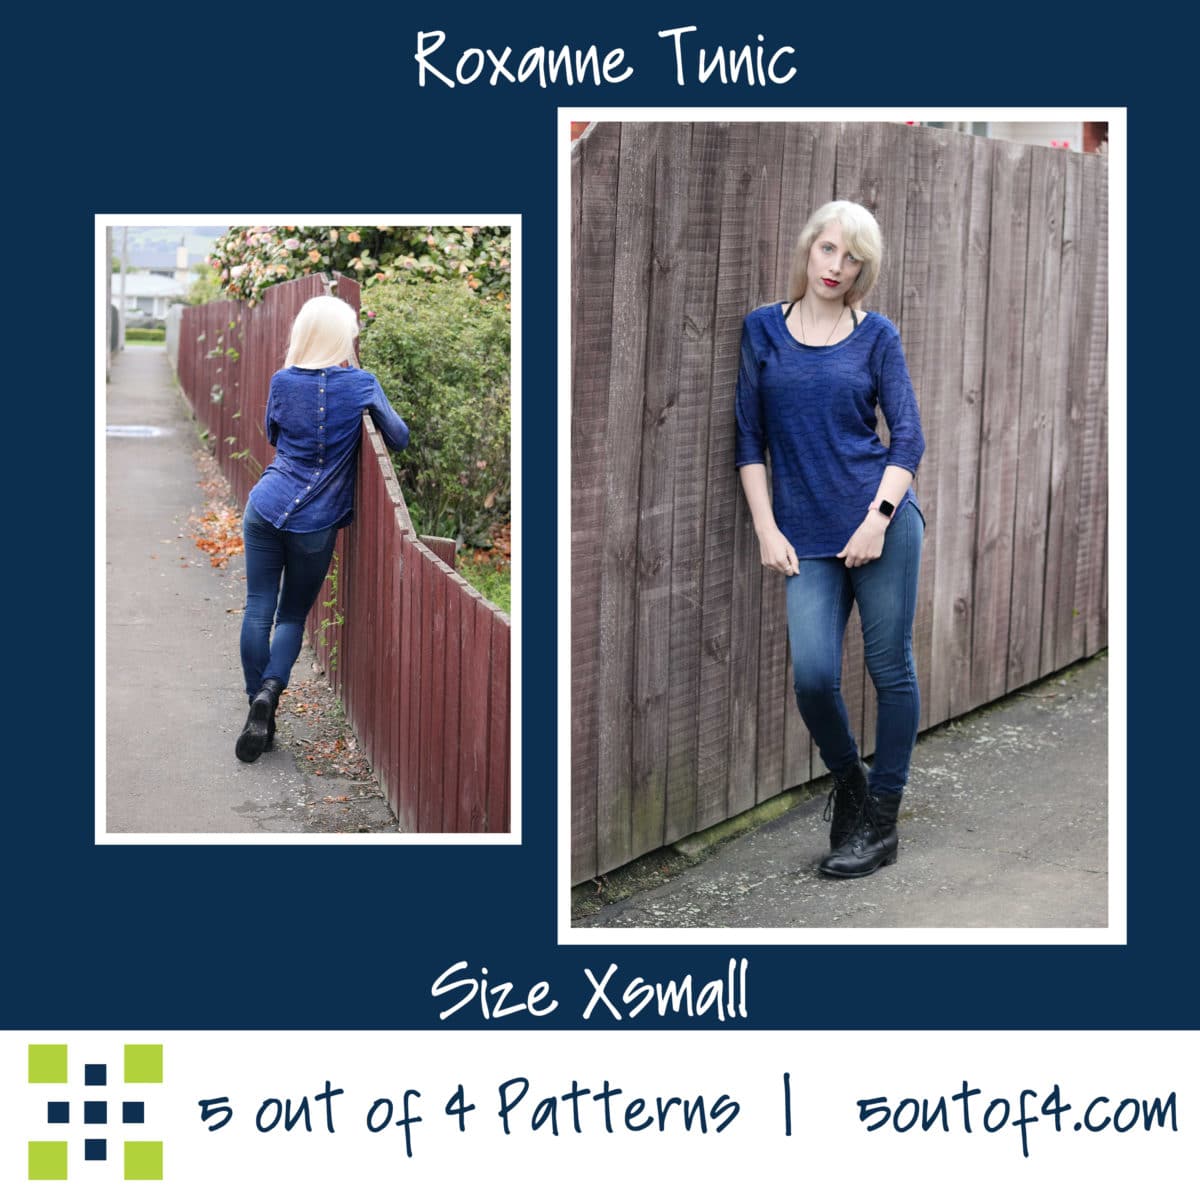 Roxanne Tunic - 5 out of 4 Patterns